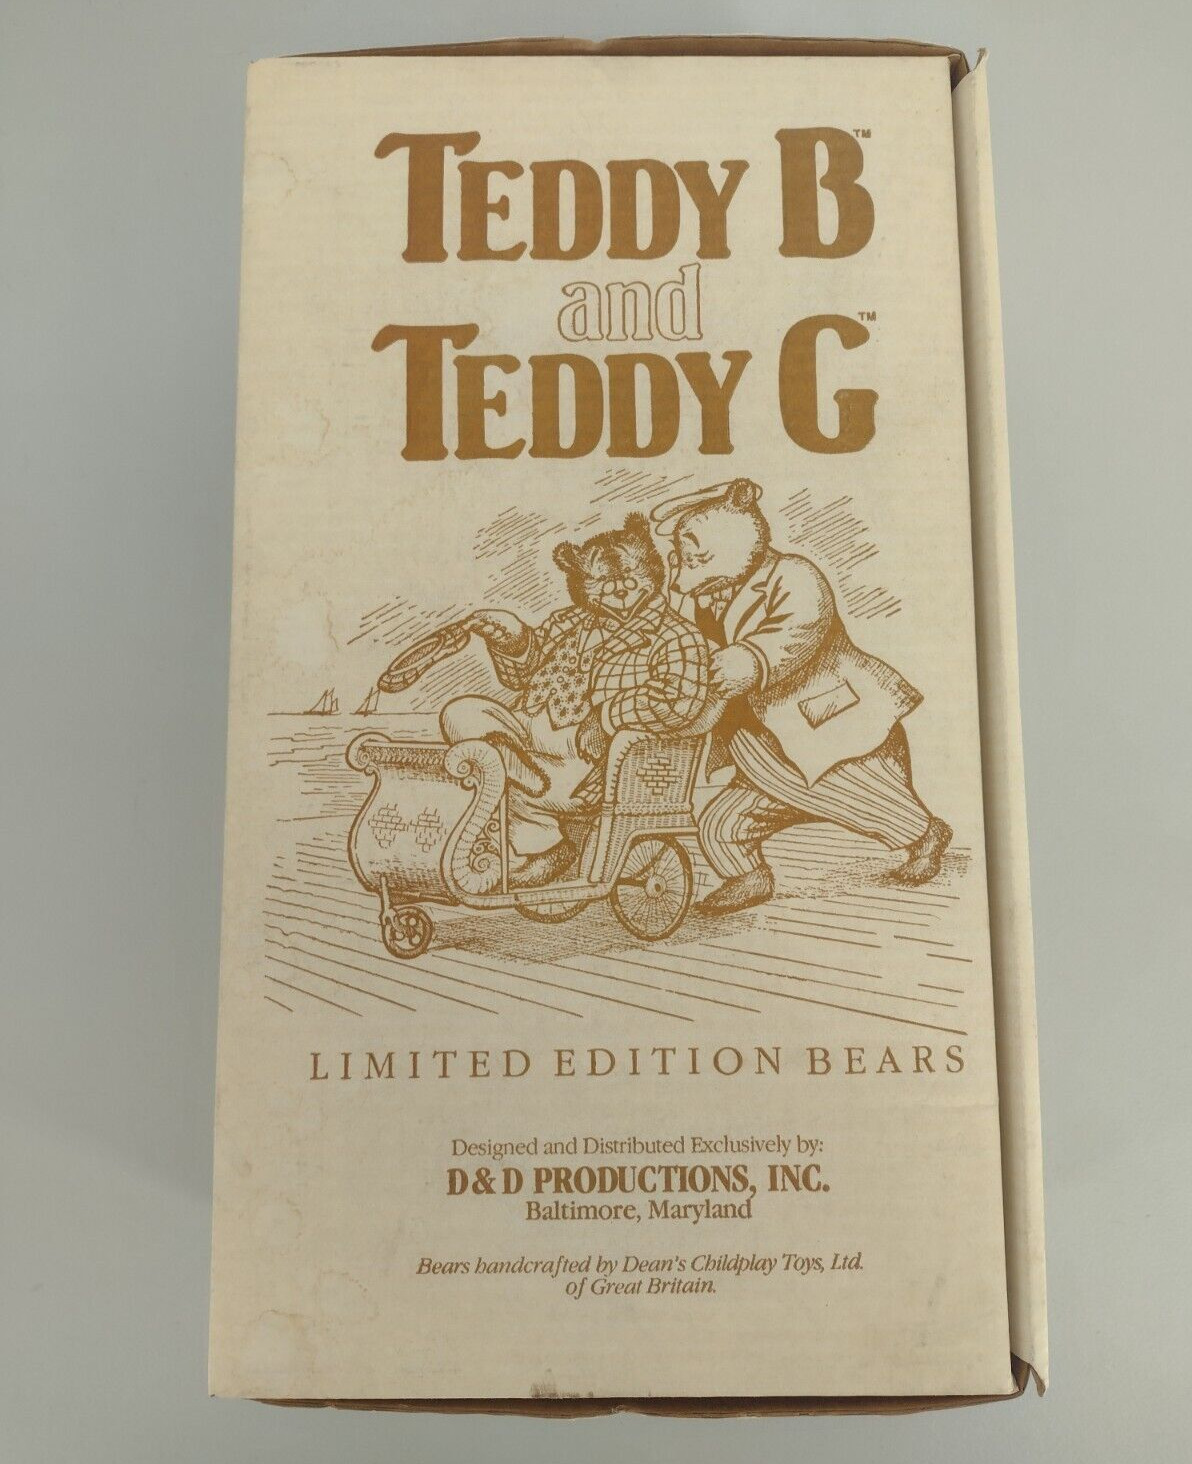 BOX ONLY For Vintage Teddy B And Teddy G Limited Edition Bear, Teddy Roosevelt